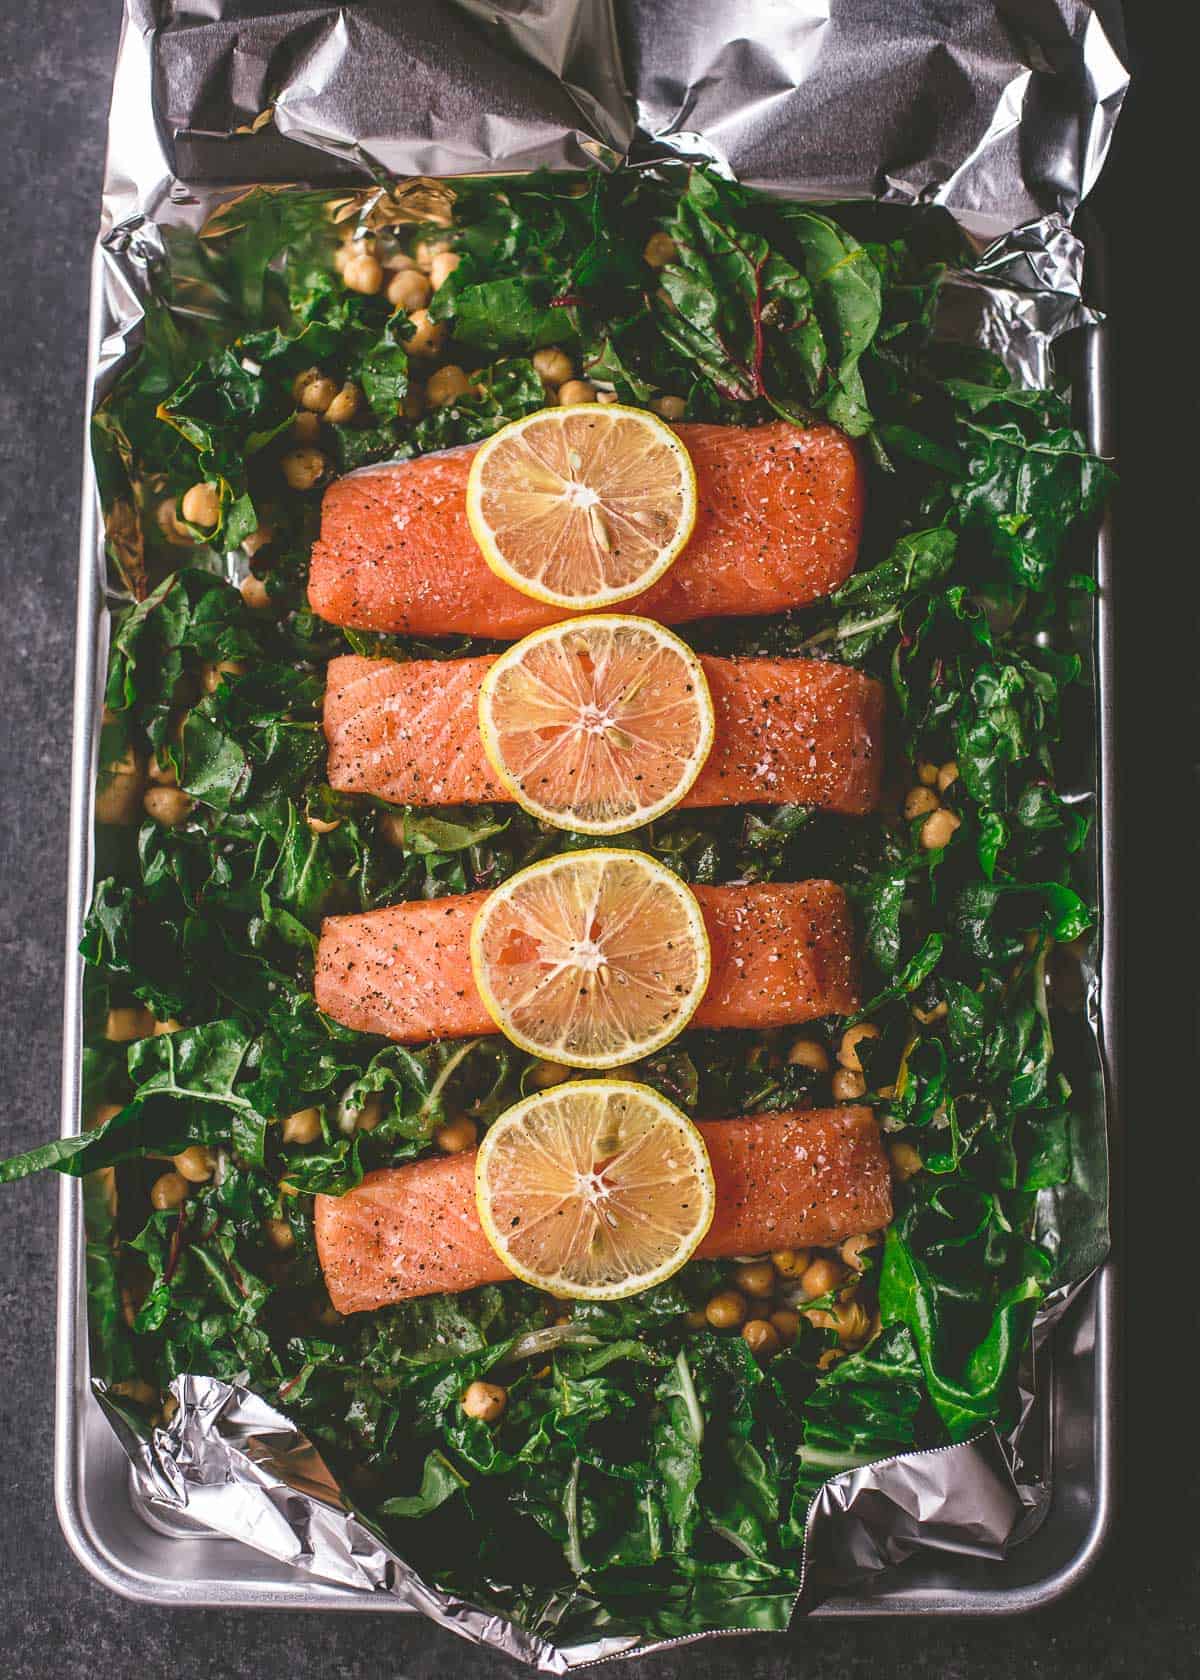 salmon filets, greens and chickpeas in a foil wrap